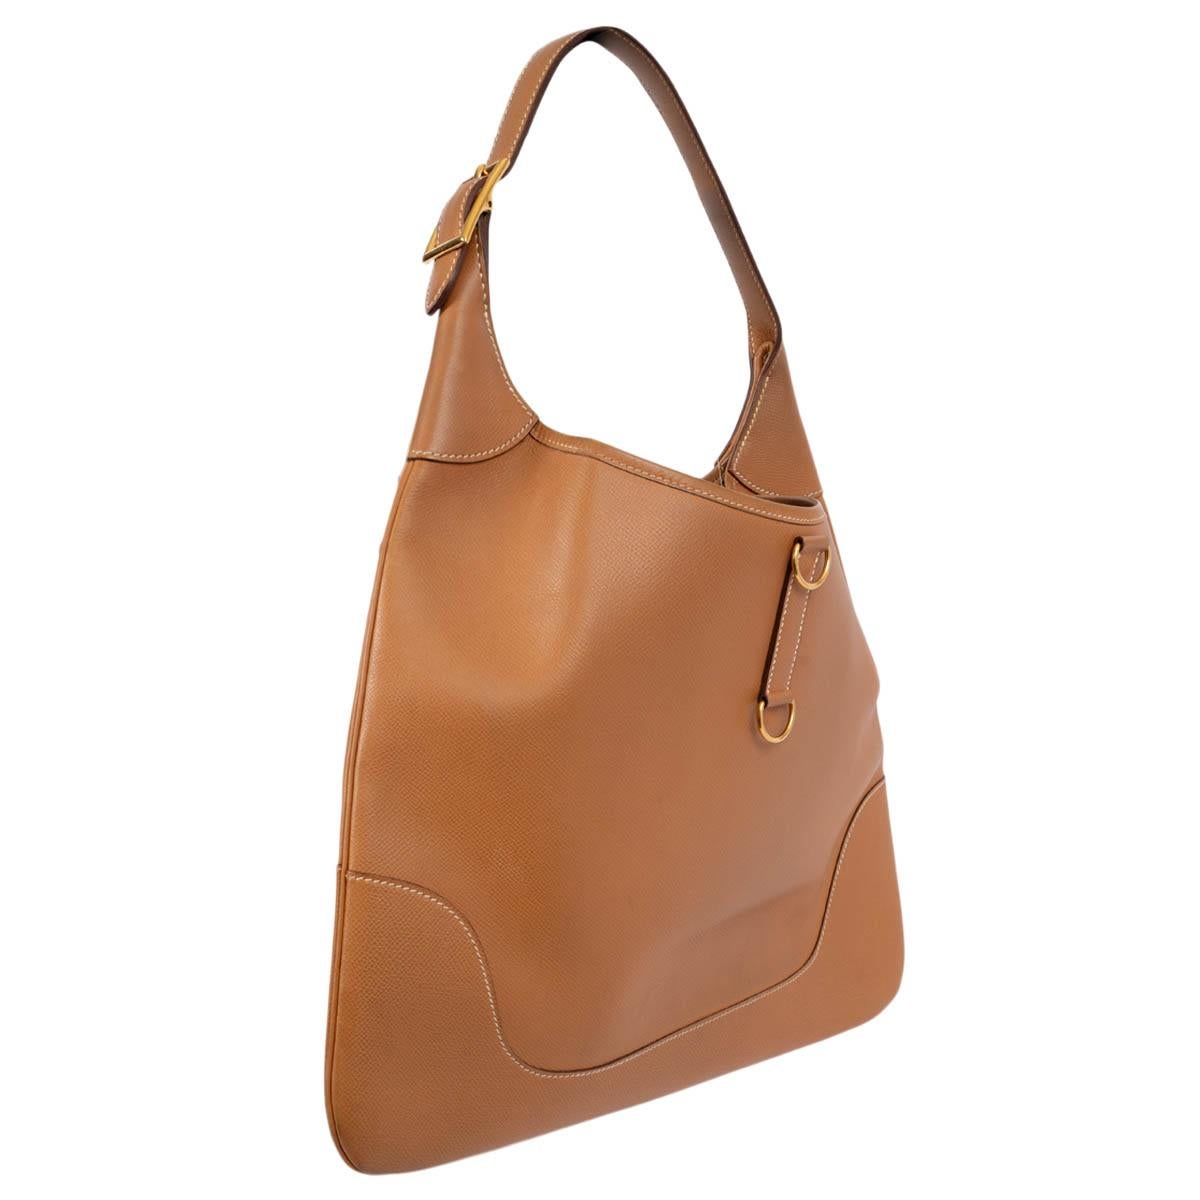 100% authentic Hermès Trim 37 hobo in Gold (camel) Courchevel leather featuring gold-tone hardware. Lined in beige suede with one zipper pocket against the back and one open pocket against the front. Has been carried and shows some faint wear to the